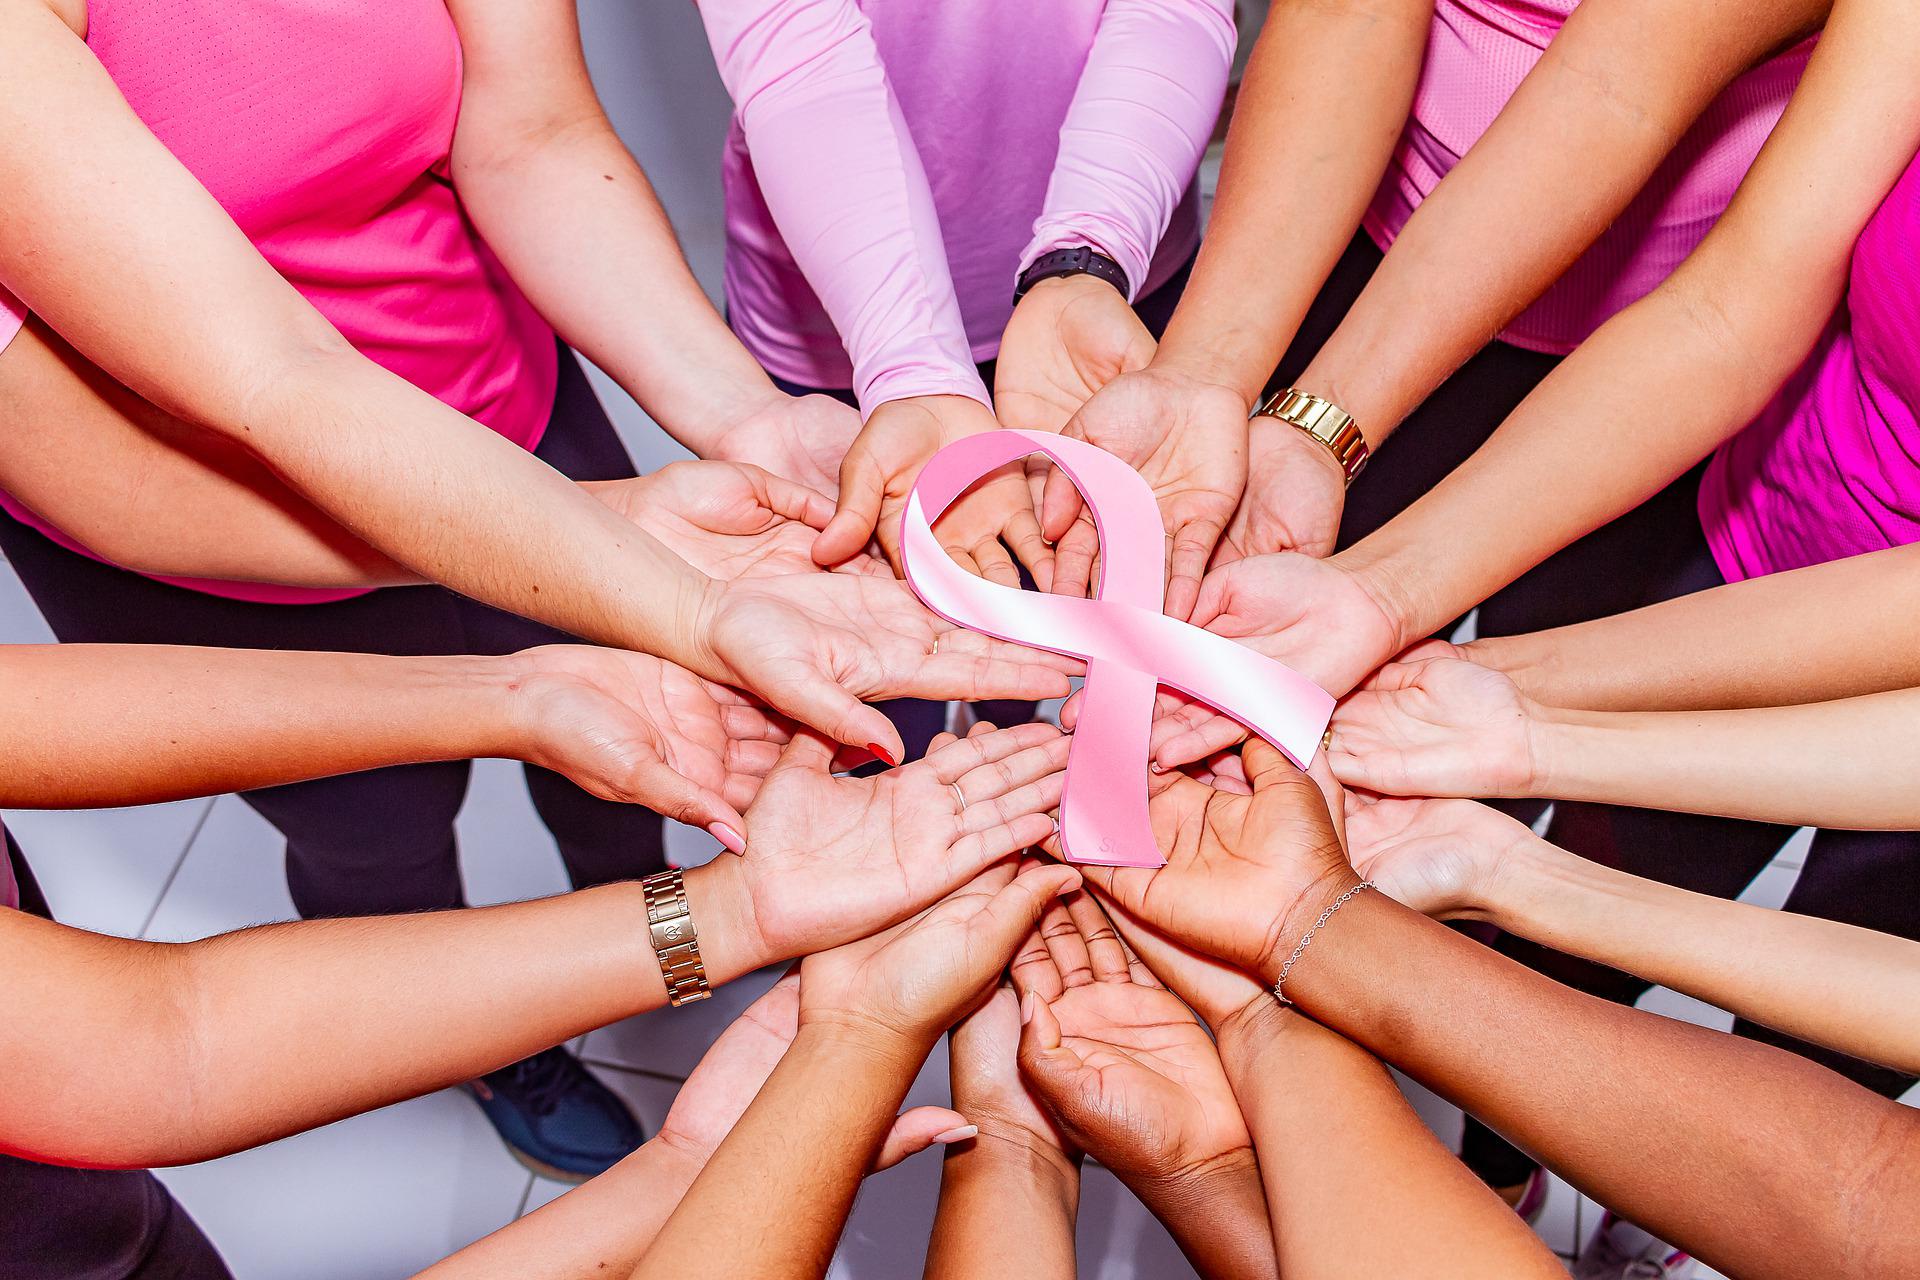 Circle of hands, palms up, with a pink ribbon in the center, signifying unity and women's health.